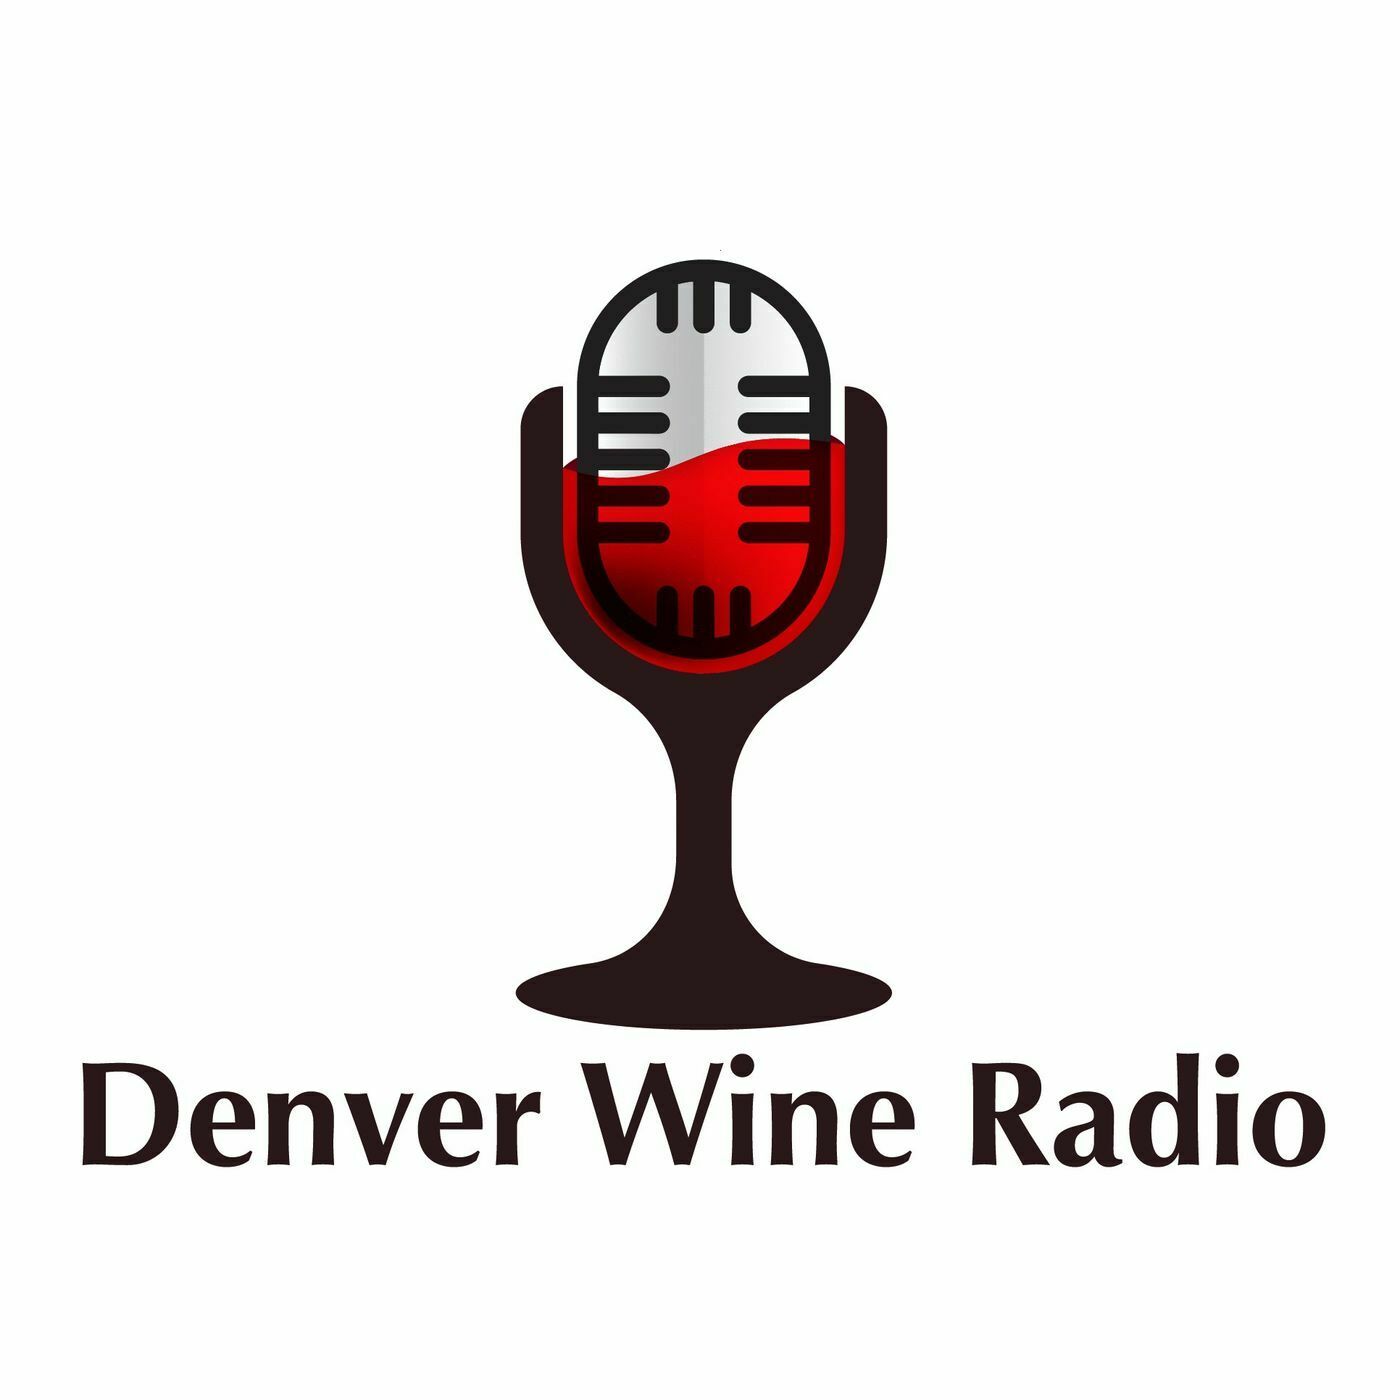 Meet Kyle Schlachter from the Colorado Wine Board